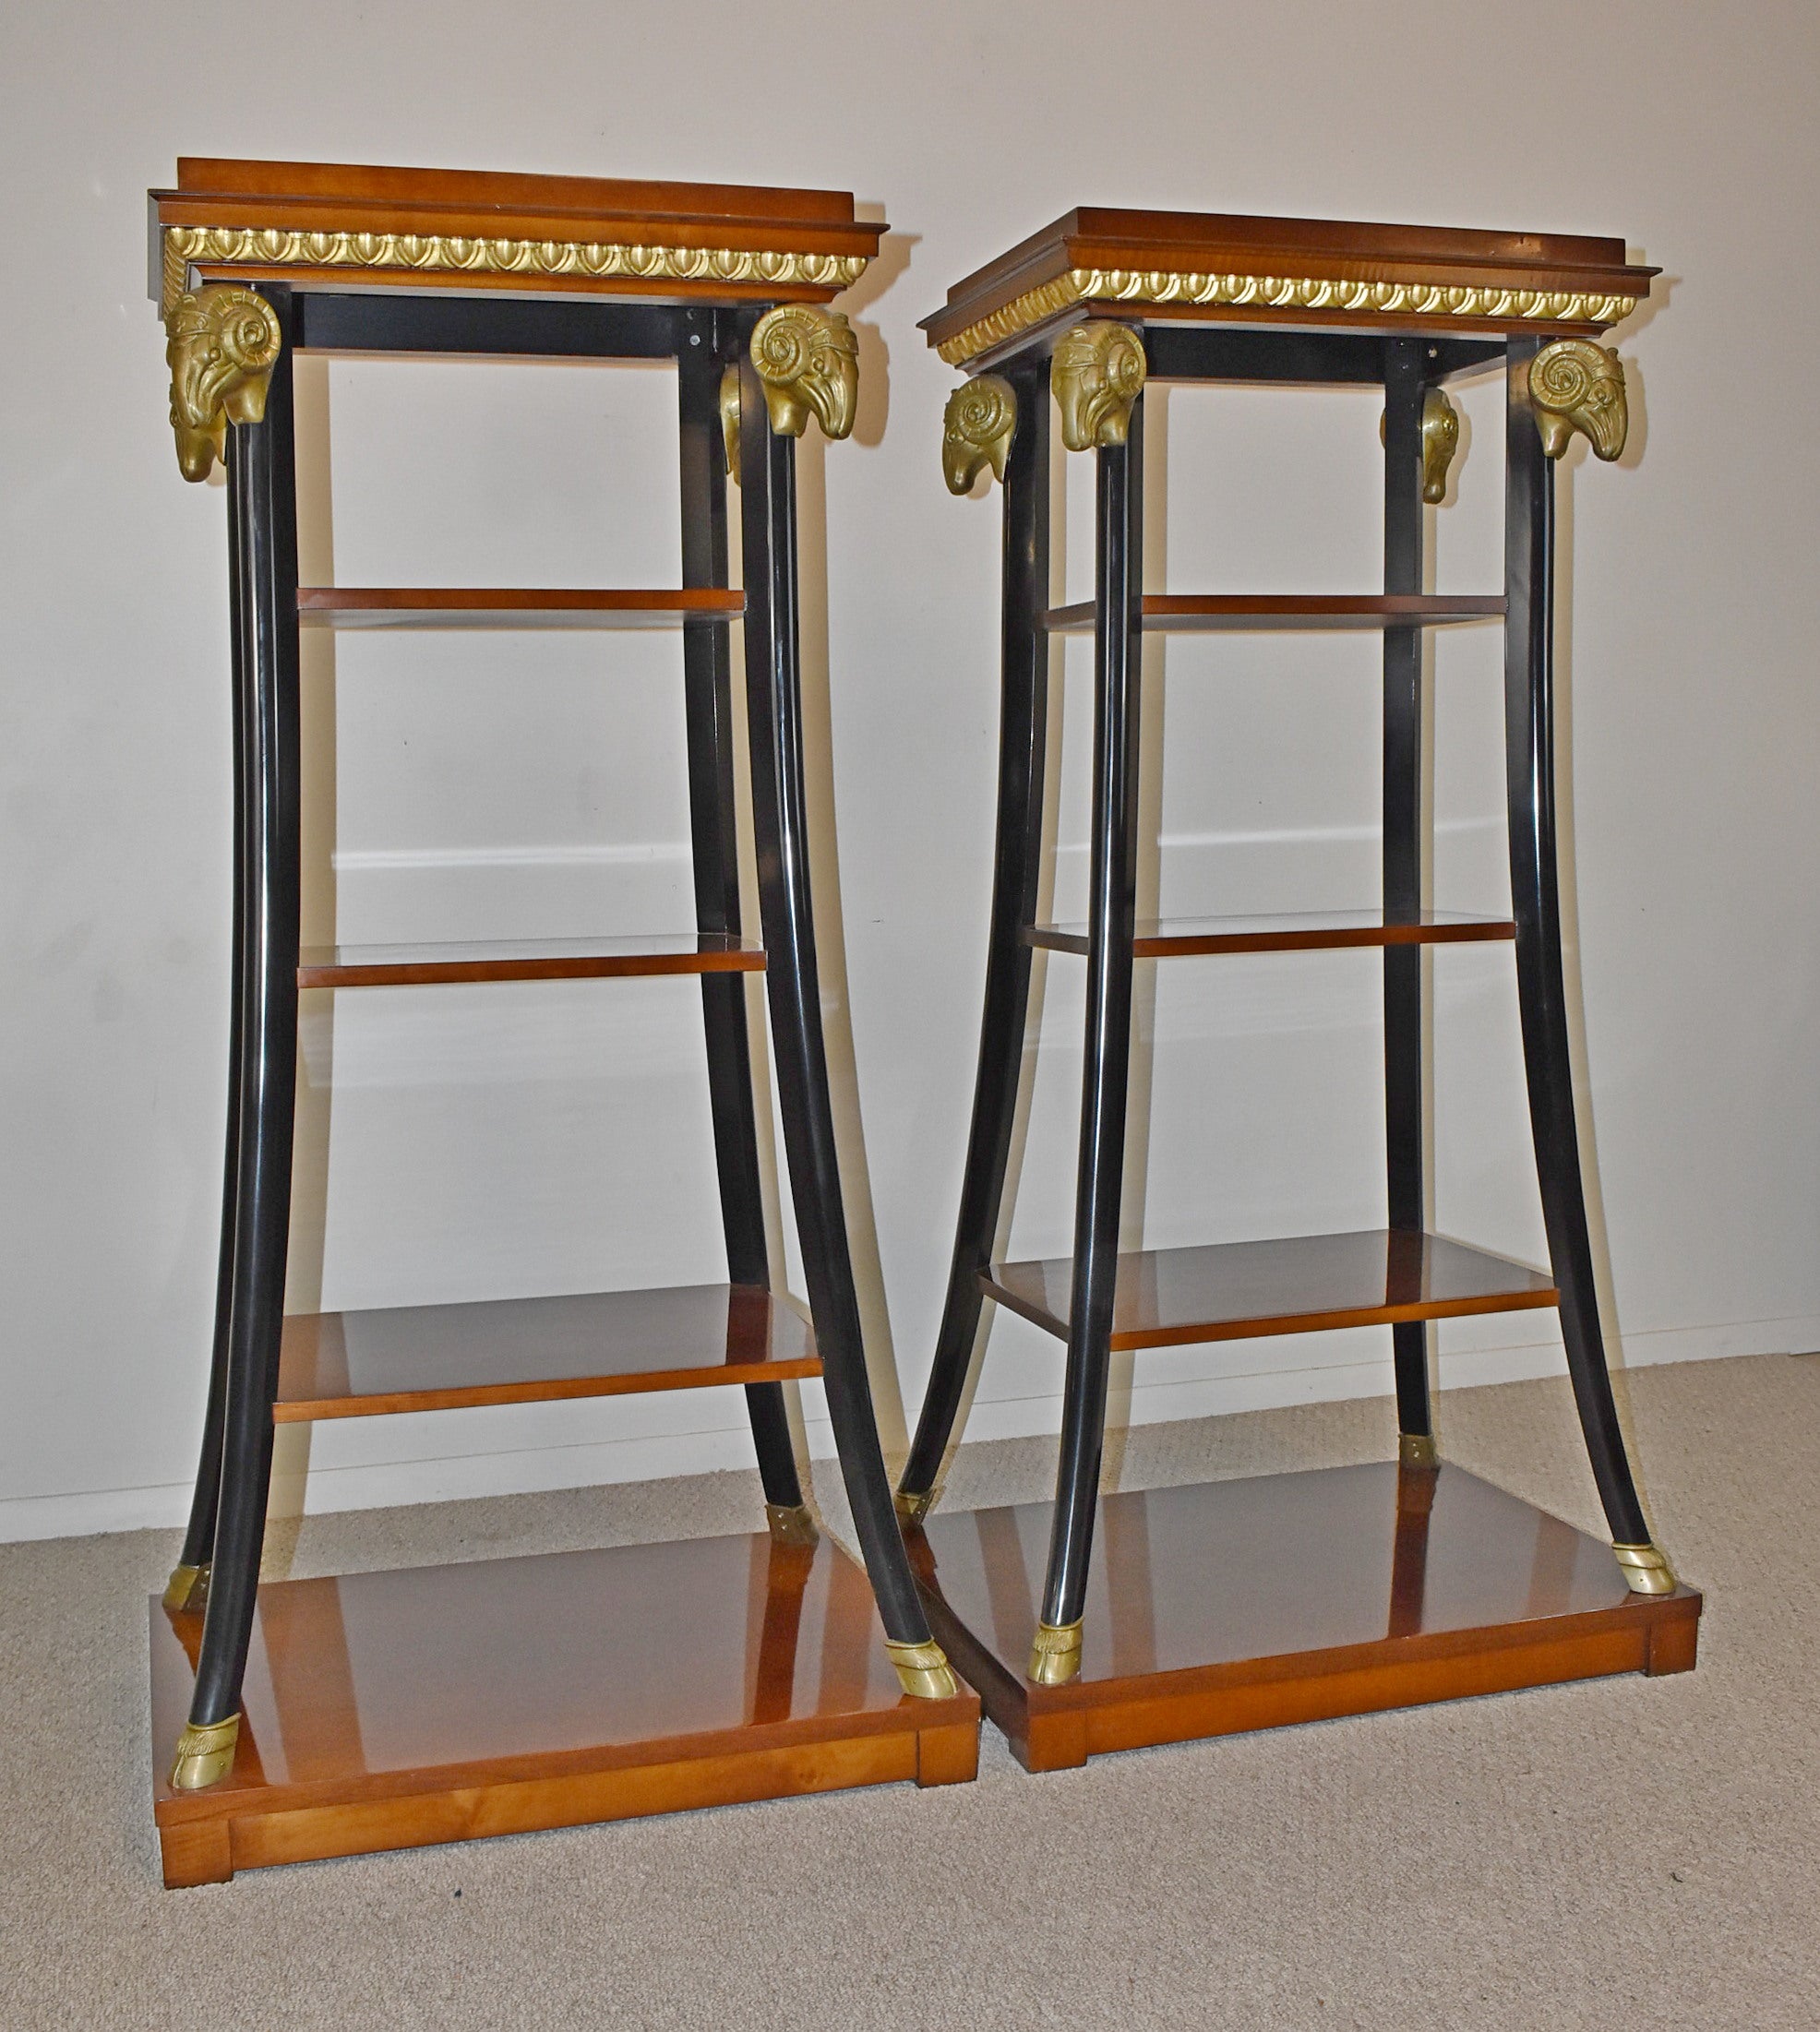 Cherry Empire Stand with 5 Tier Shelves by John Widdicomb